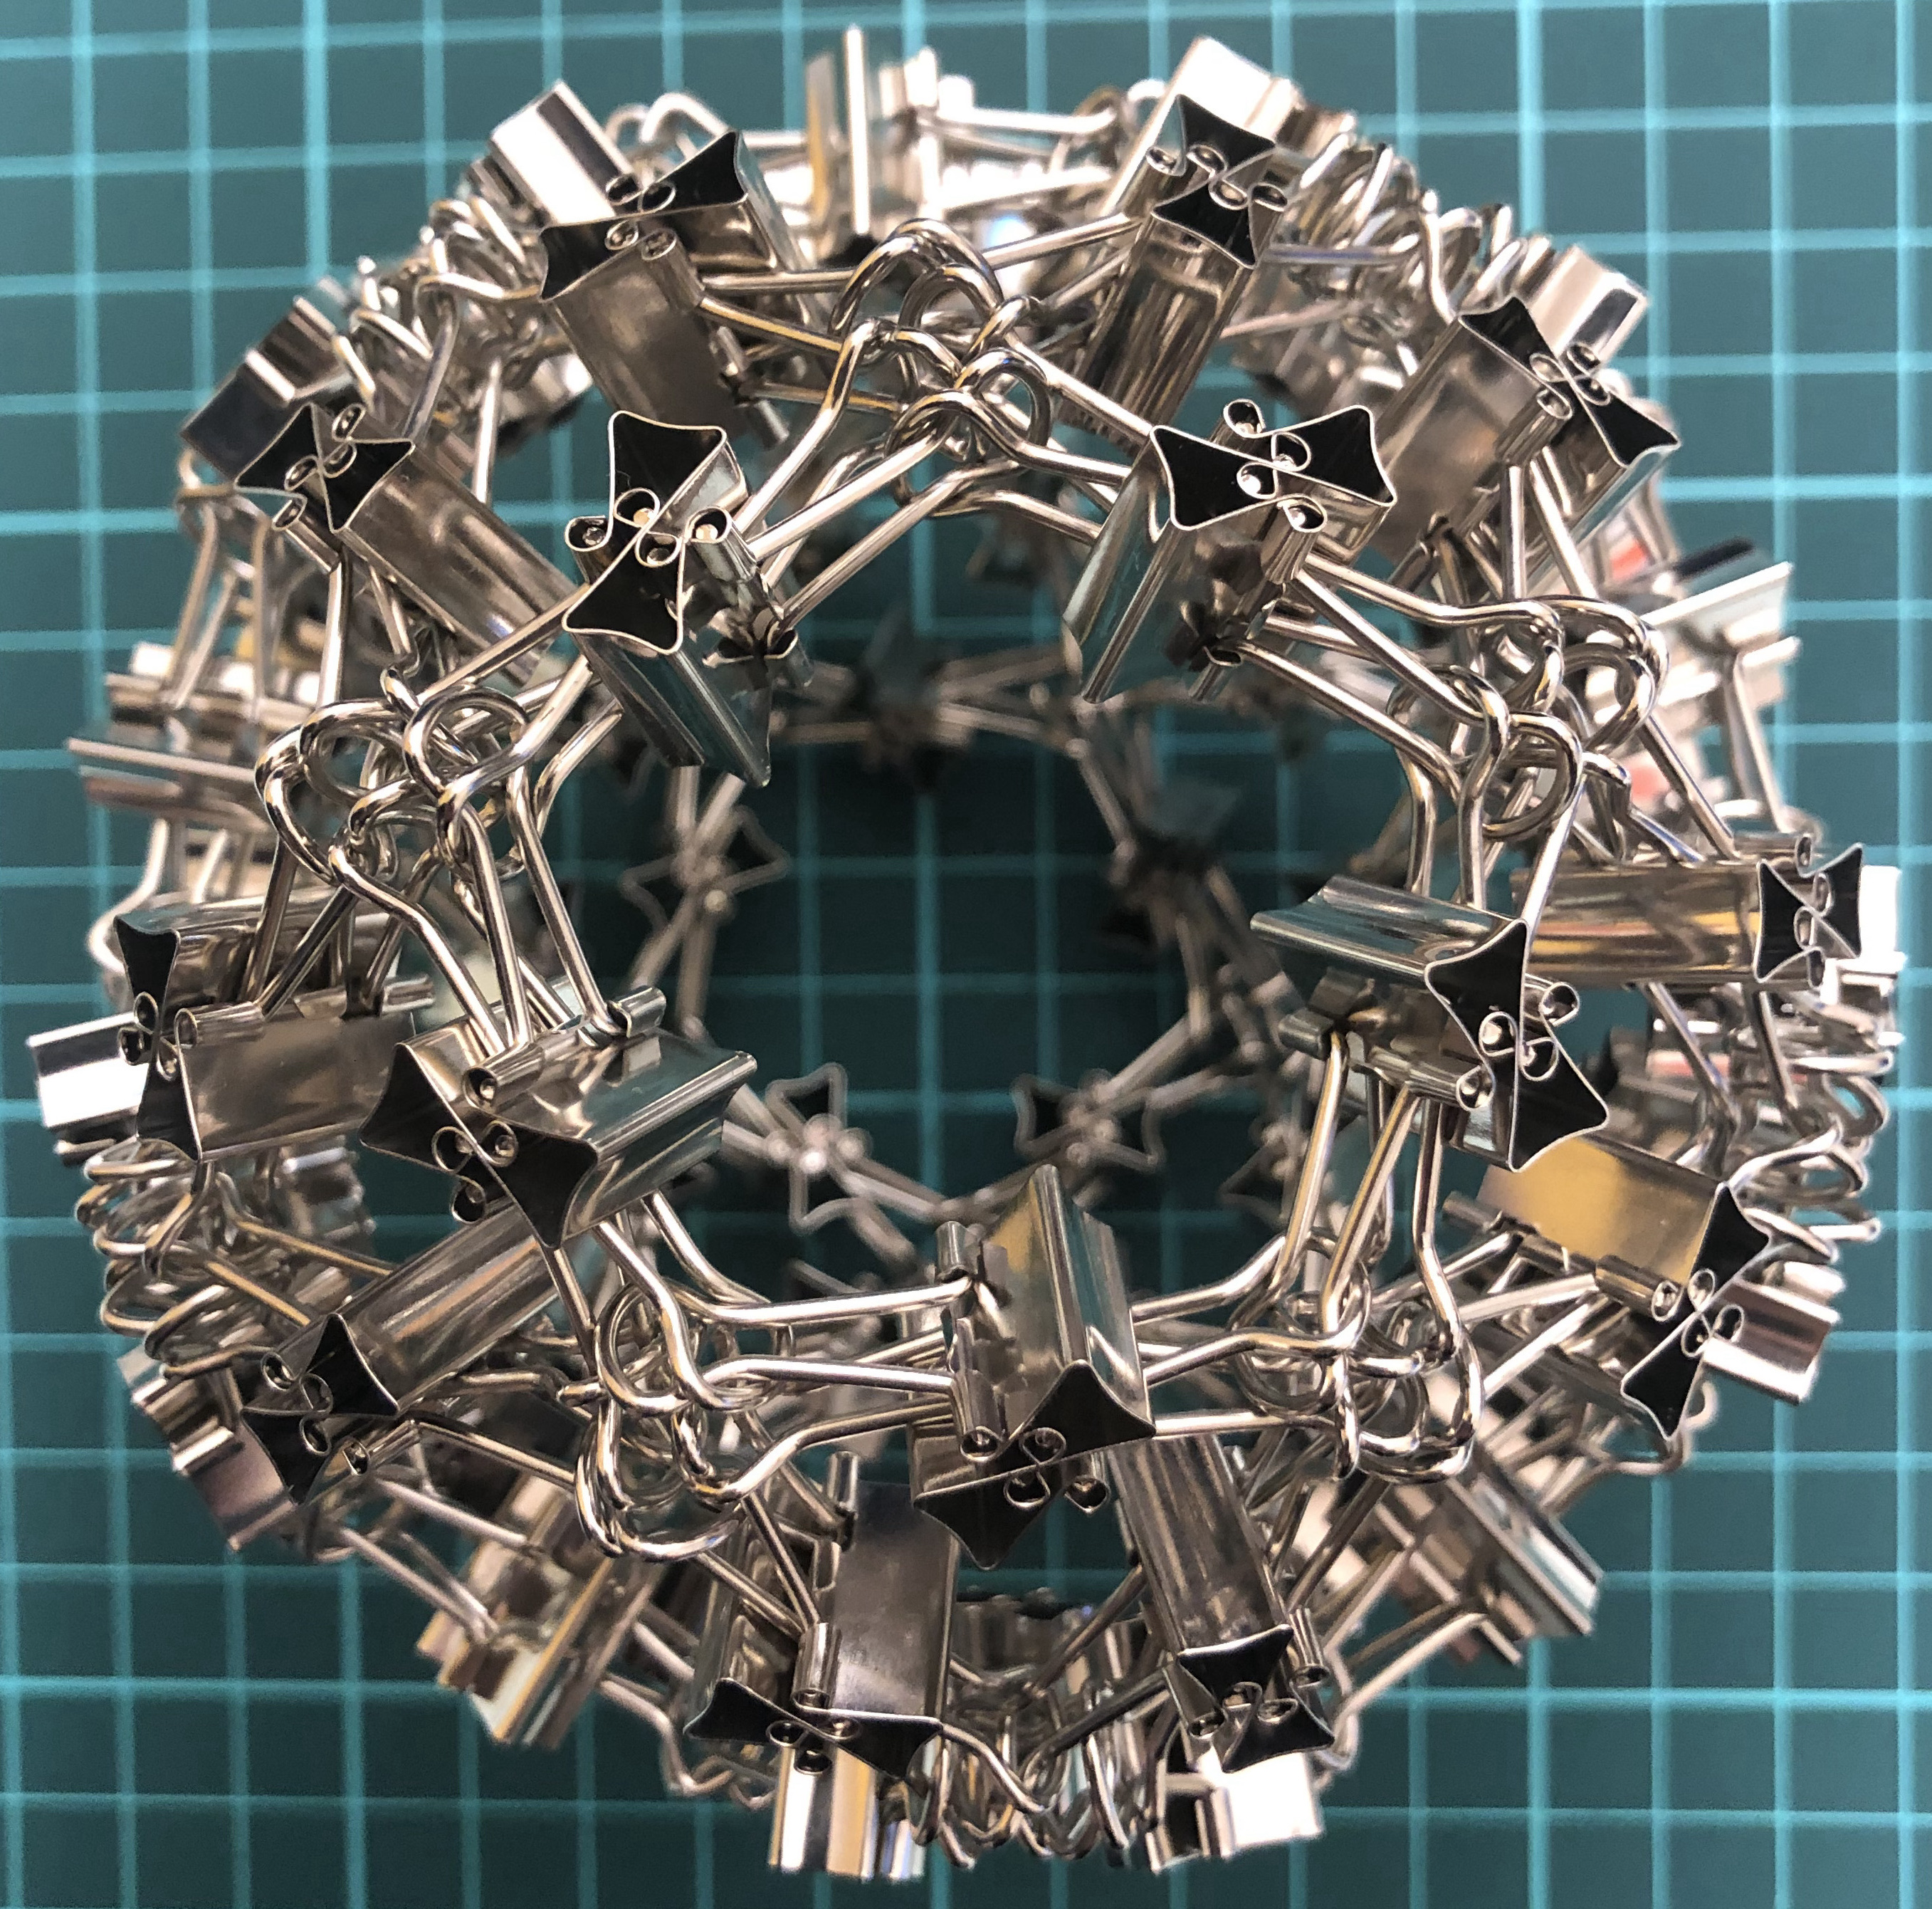 120 clips forming 60 I-edges forming icosidodecahedron